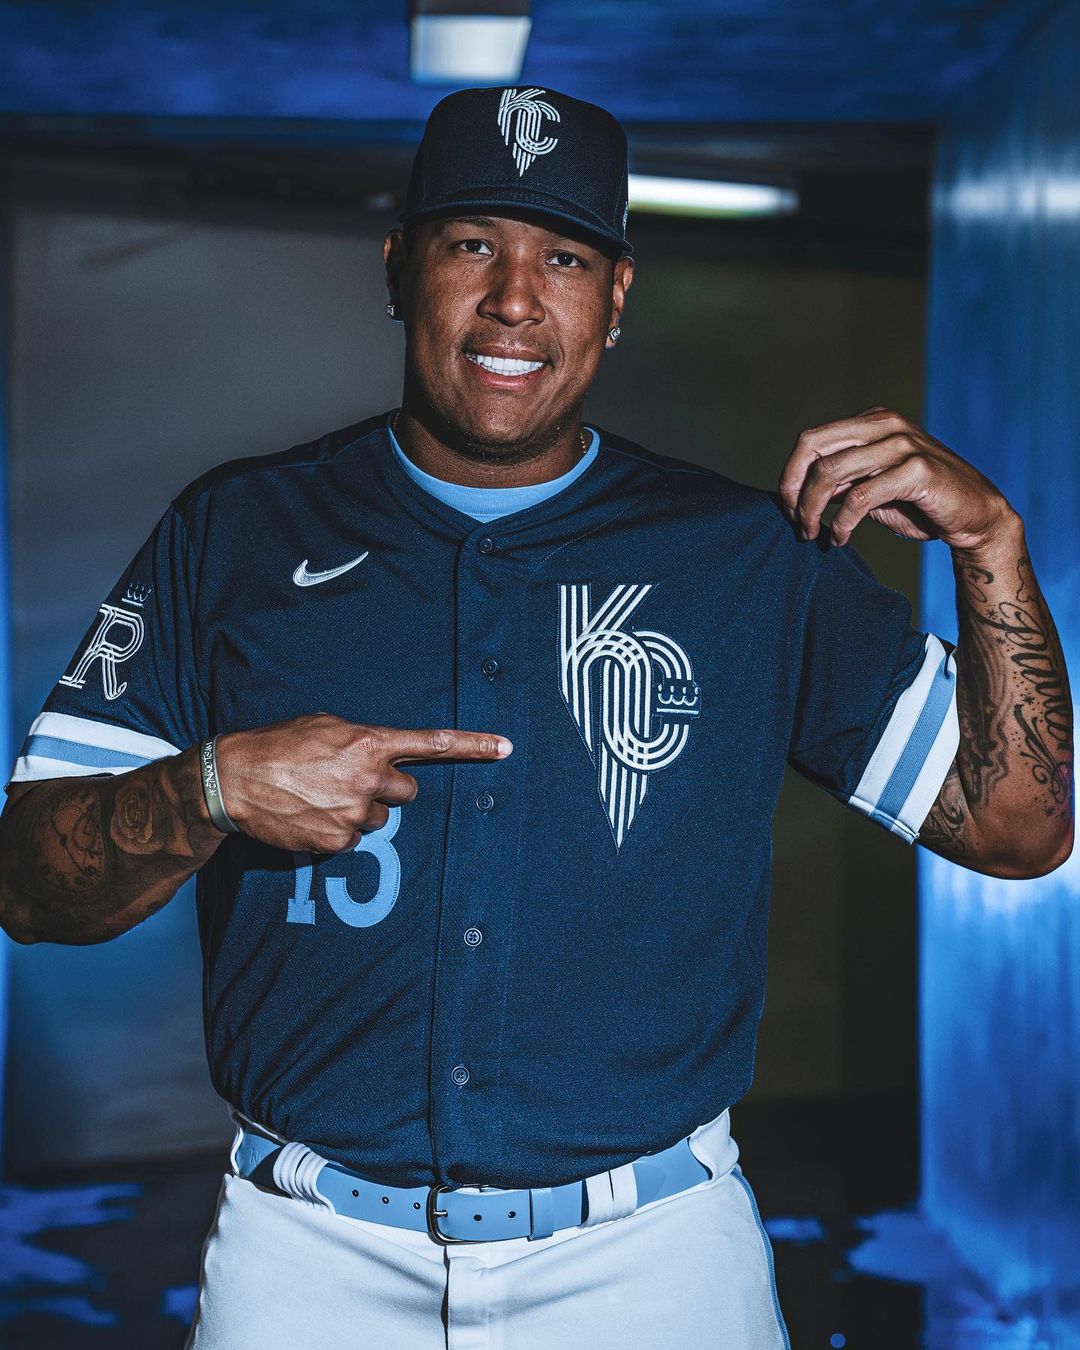 Per Fox Sports: MLB. Royals are getting city connect jerseys. Will